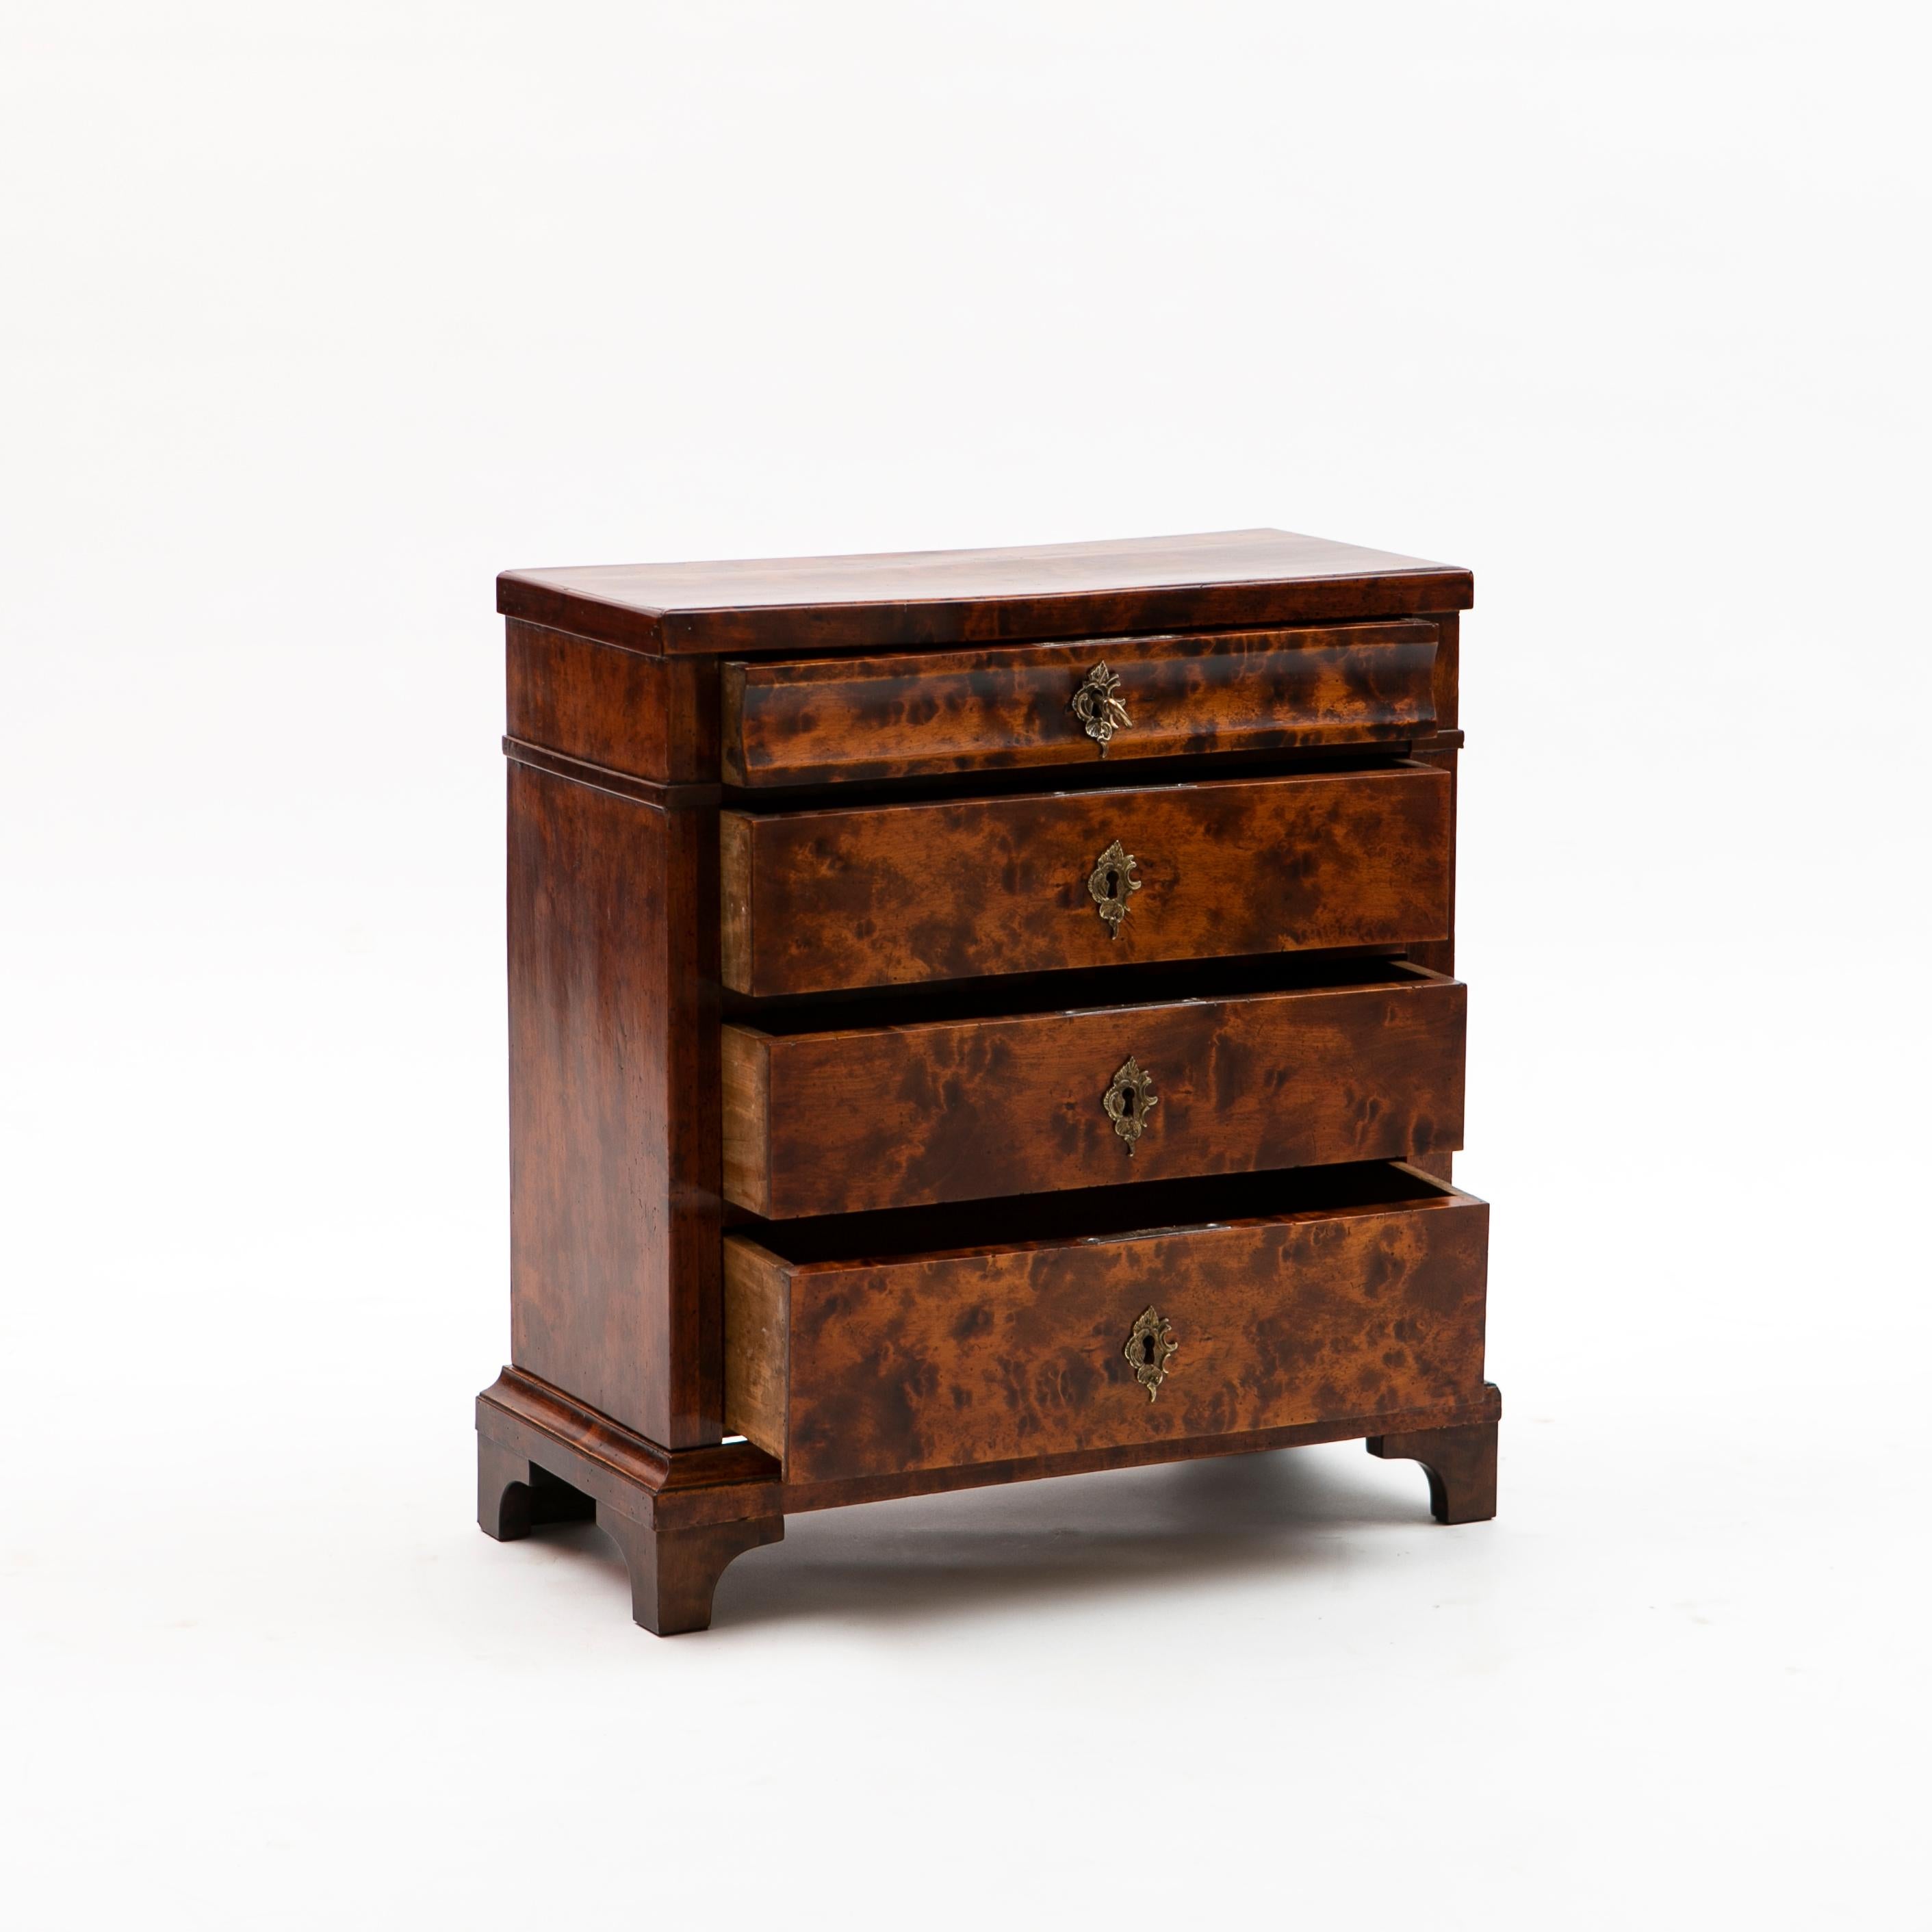 Petit Danish Late Empire Antique Chest of Drawers In Good Condition For Sale In Kastrup, DK